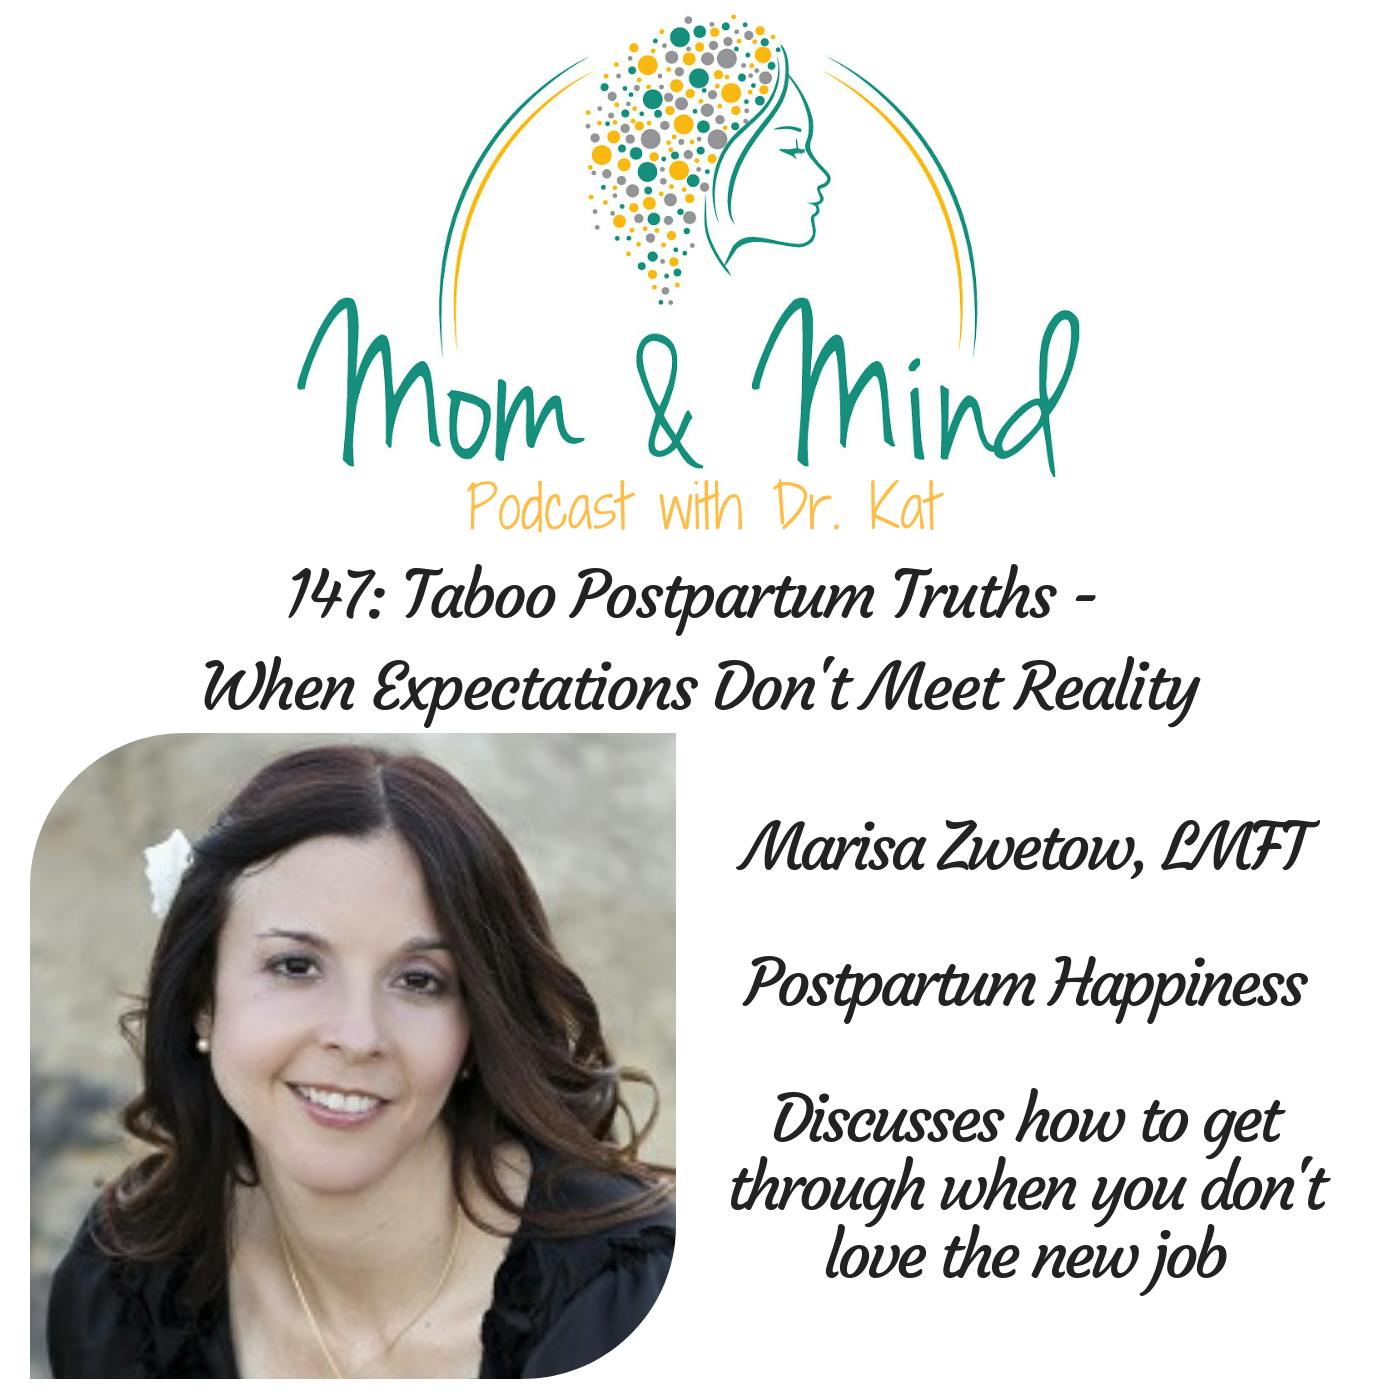 147: Taboo Postpartum Truths - When Expectations Don’t Meet Reality